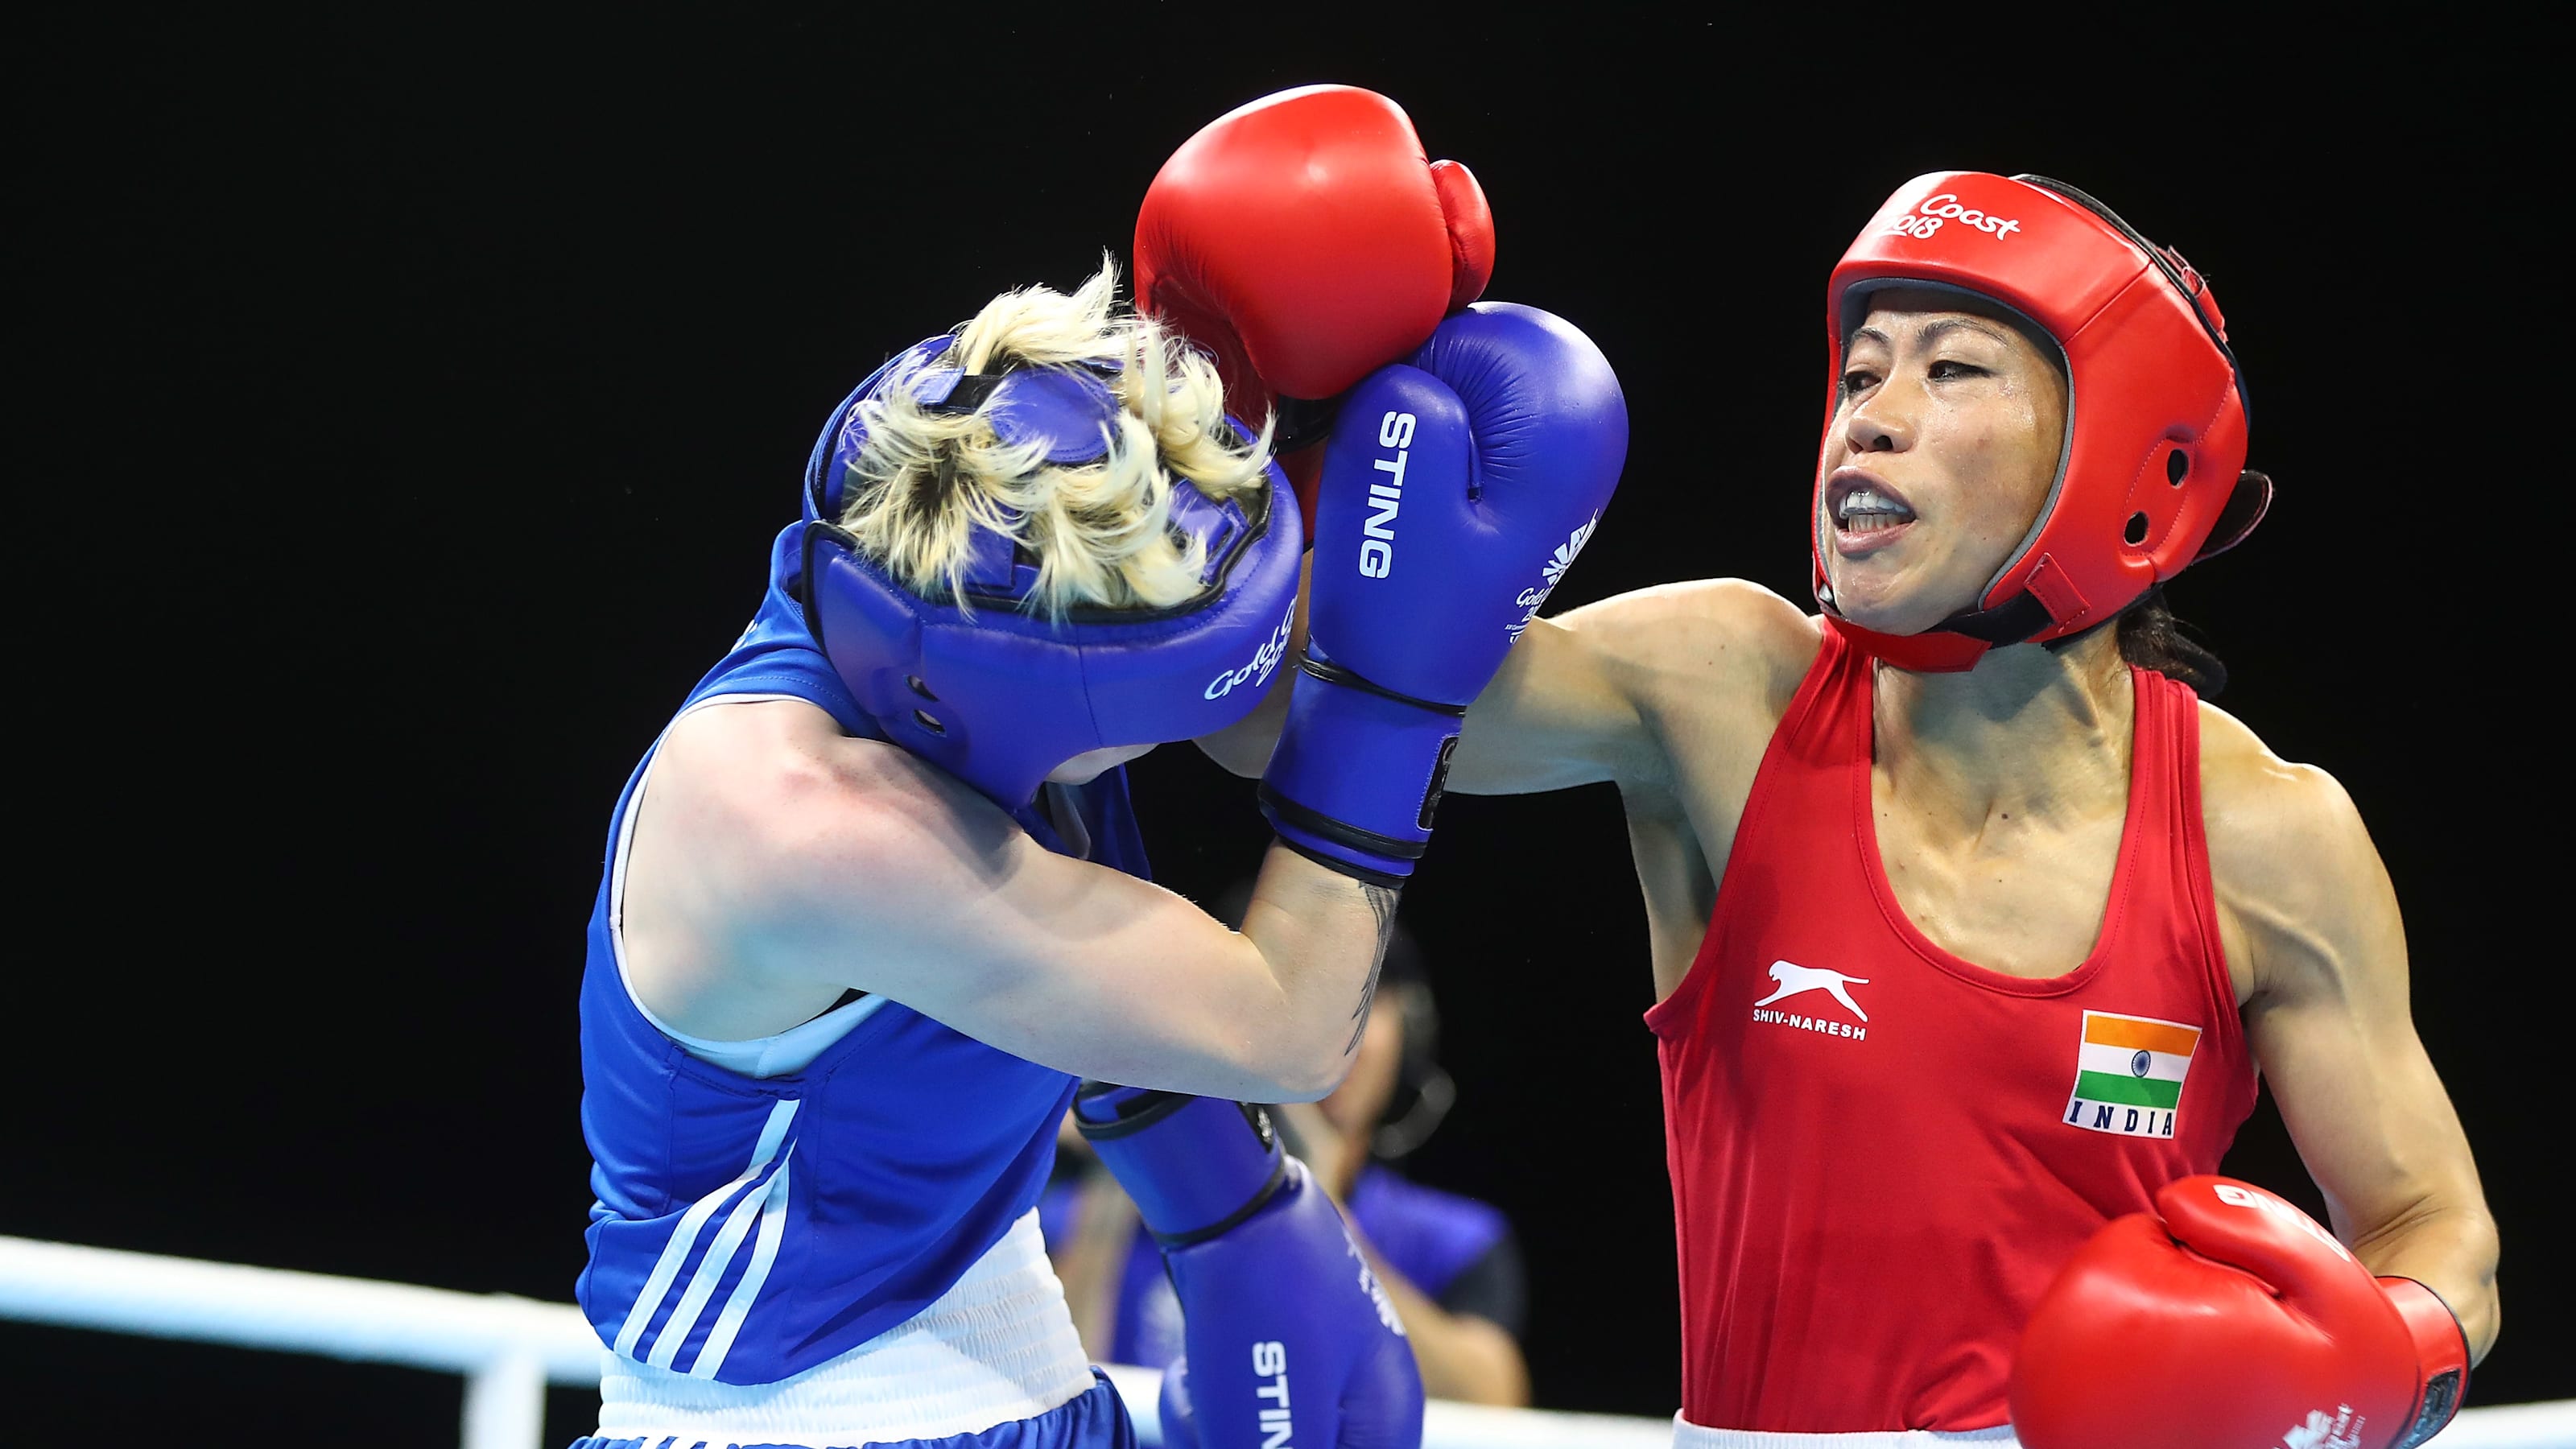 Mary Kom S Olympic Medal Chances At Tokyo 2020 Know The Indian Boxer S Rivals